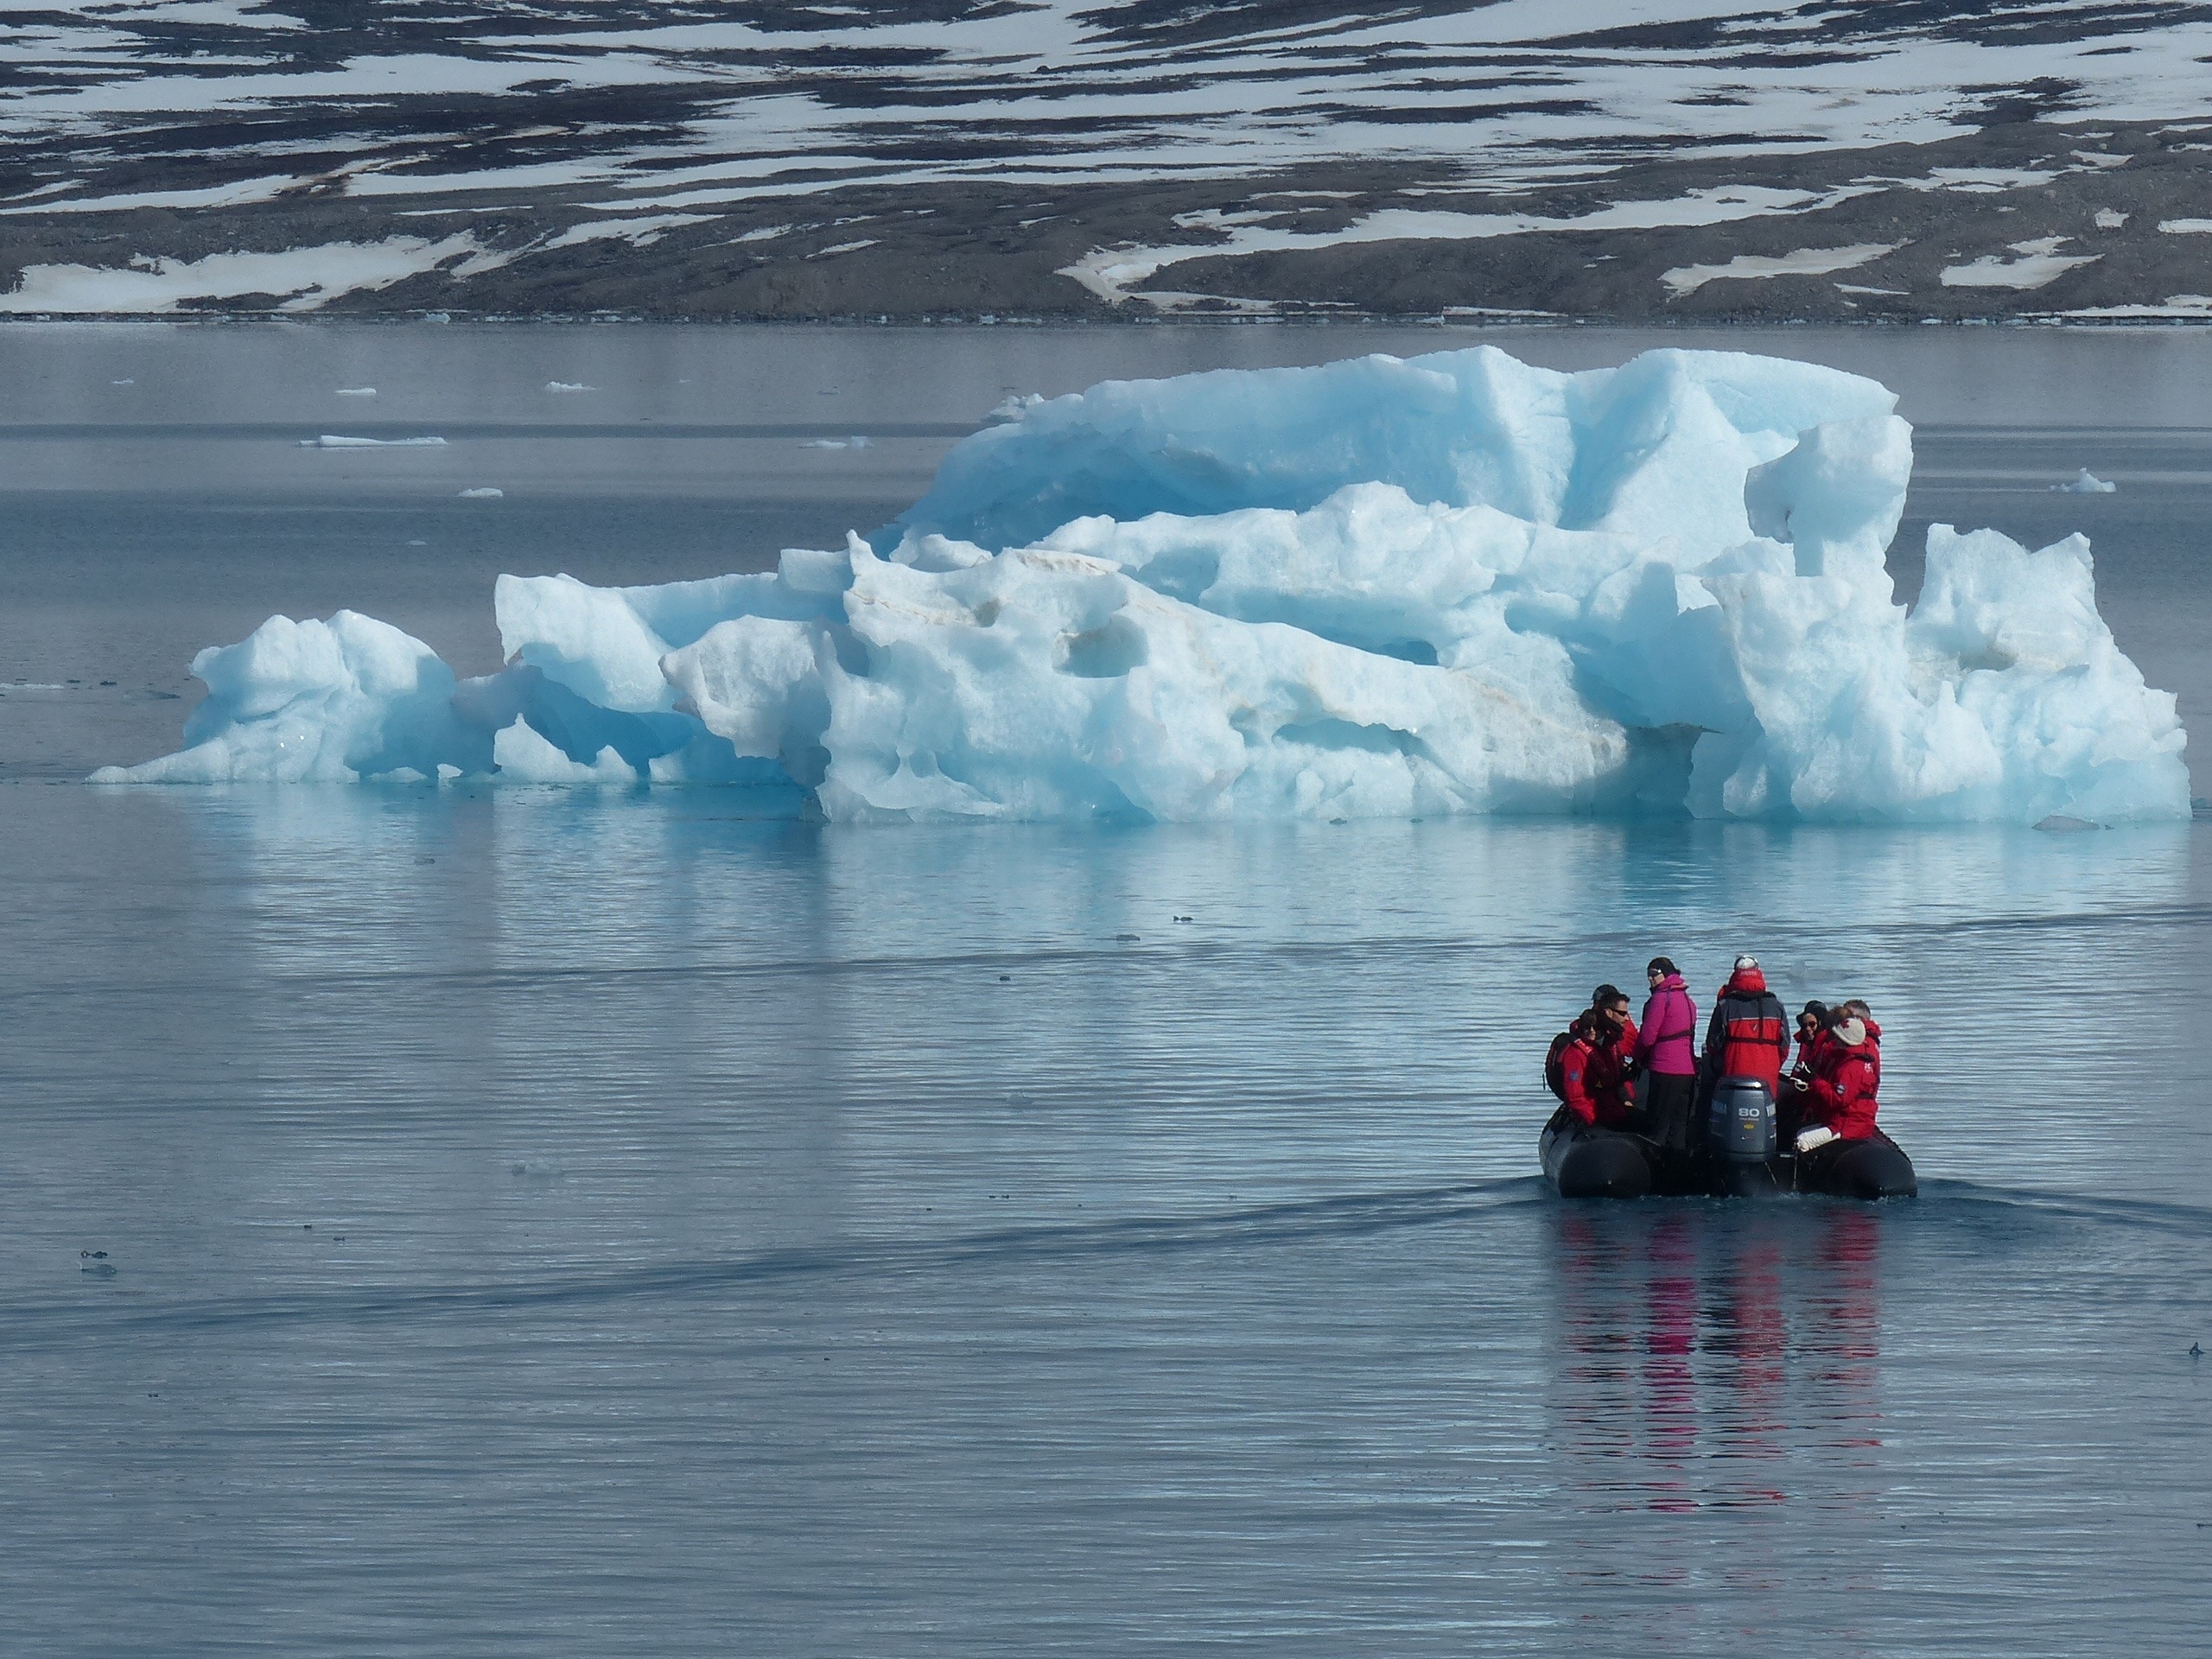 group of people riding on black inflatable boat near snow island during daytime